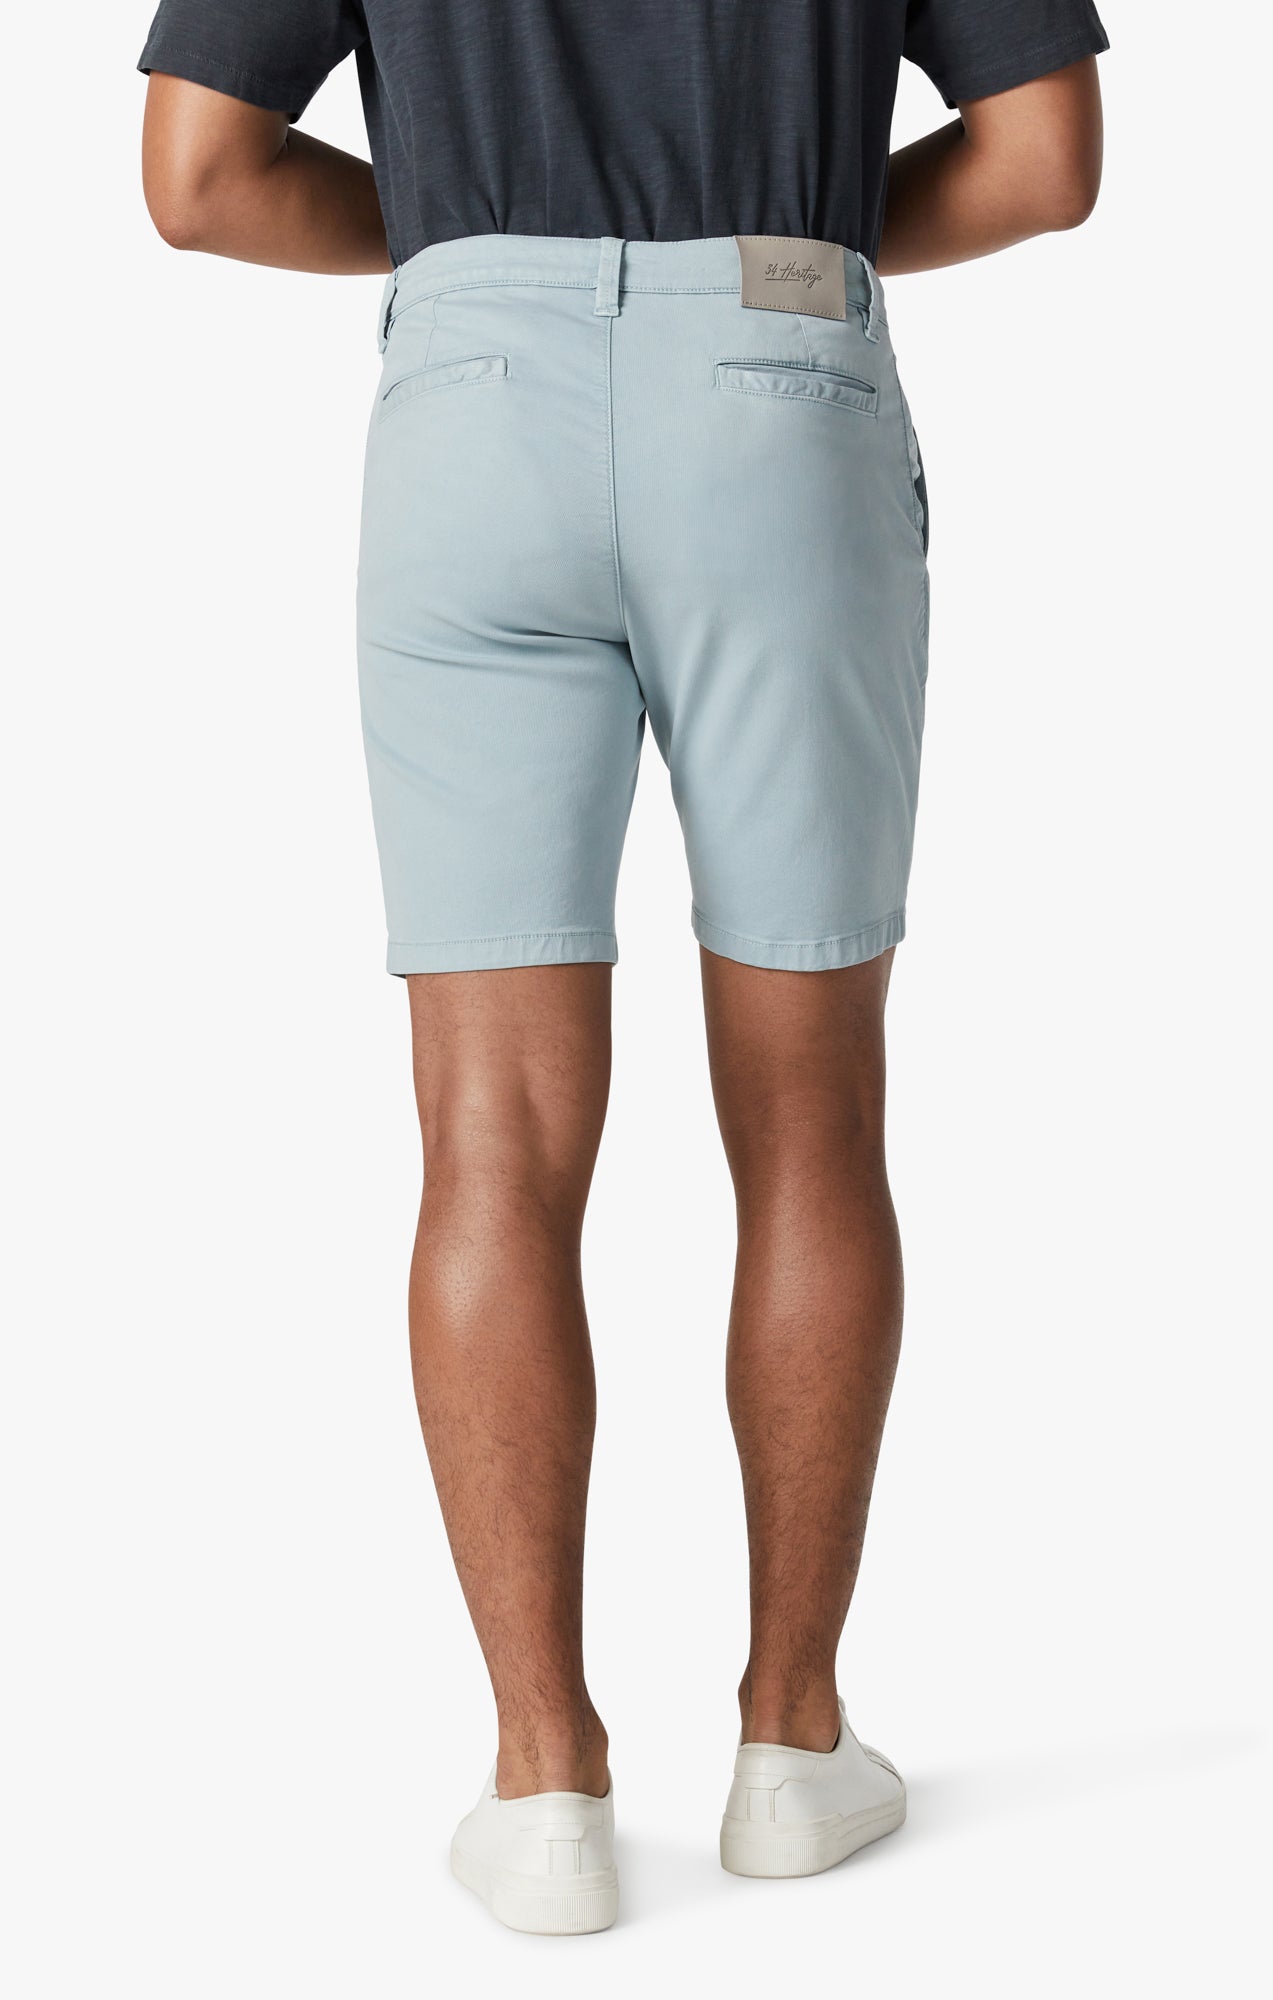 Arizona Shorts In Light Blue Soft Touch Image 5